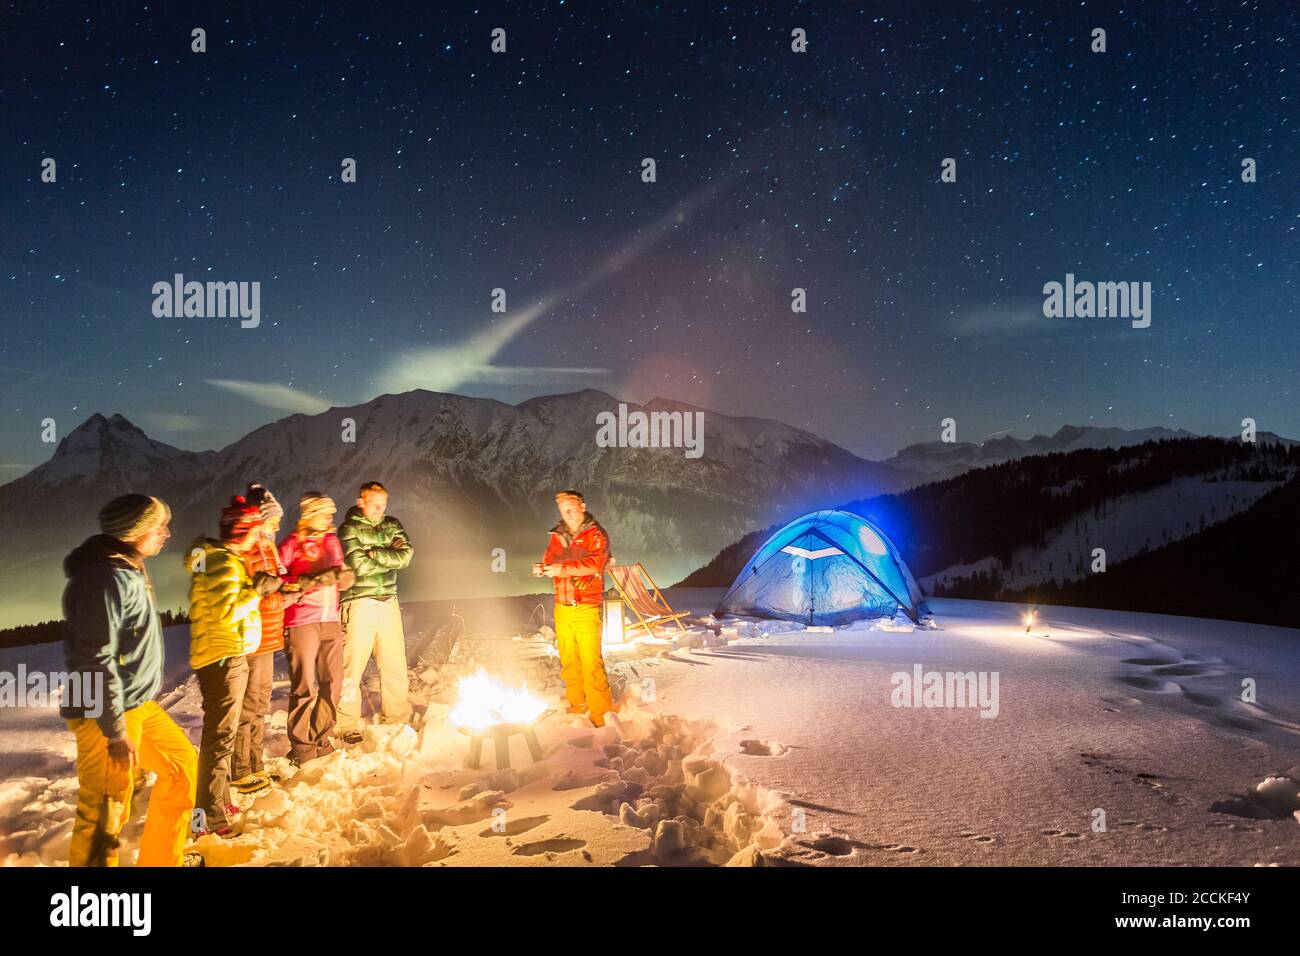 Nightscape of glowing tent in the snow and people around fire, Achenkirch, Austria Stock Photo